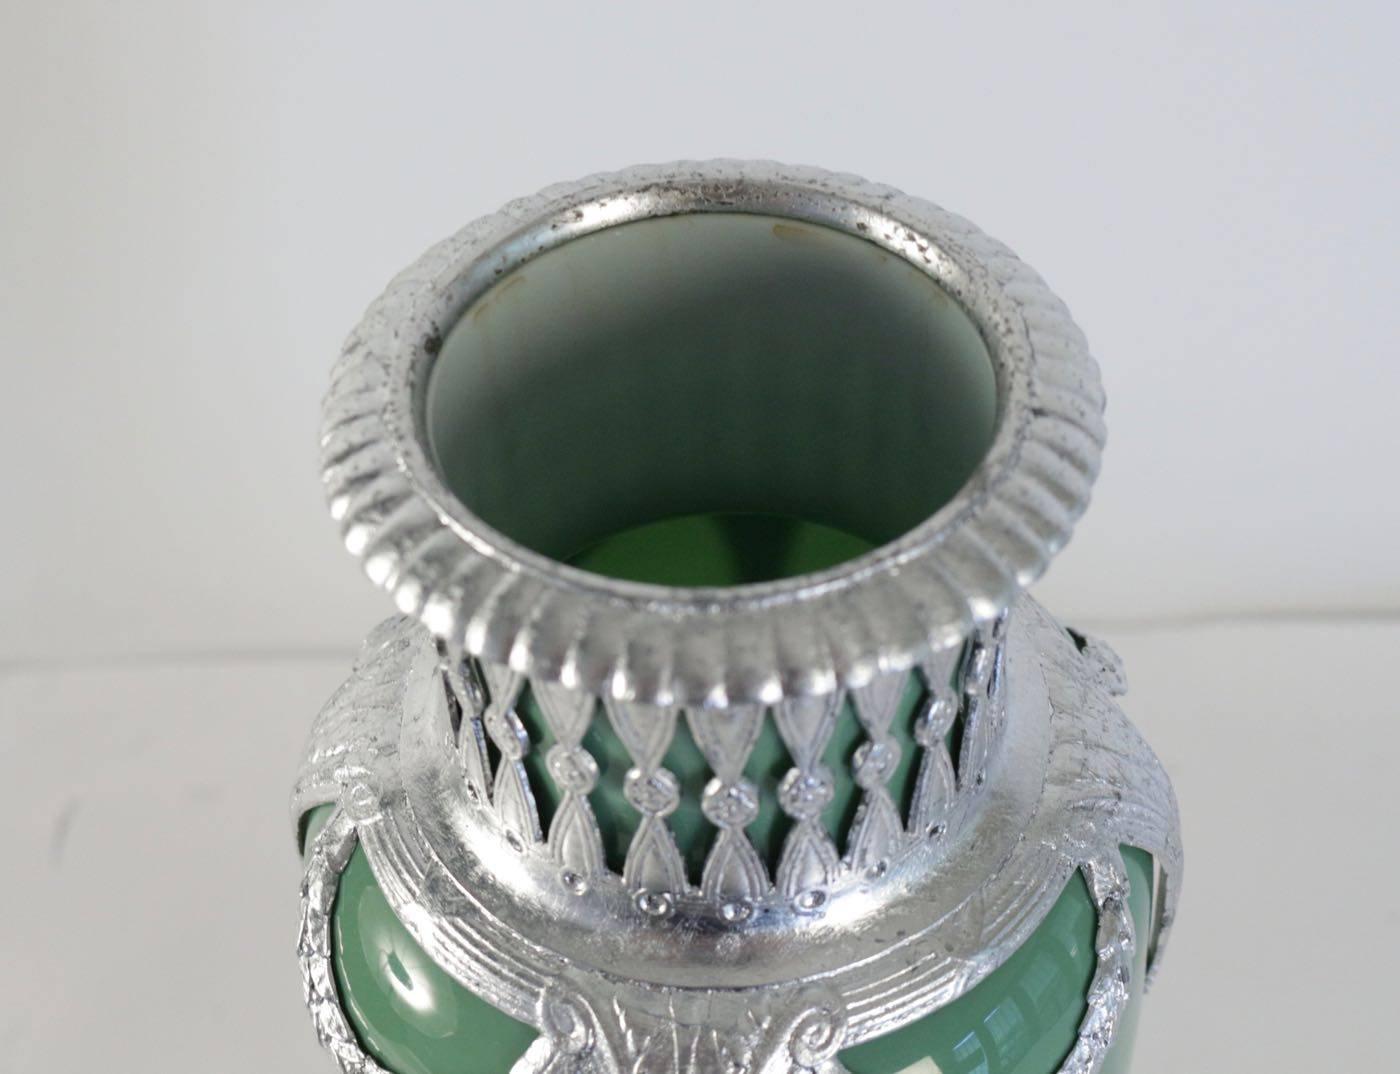 Napoleon III Celadon Vase in Faience, Silver Plate and Silver Leaf, 19th Century Period